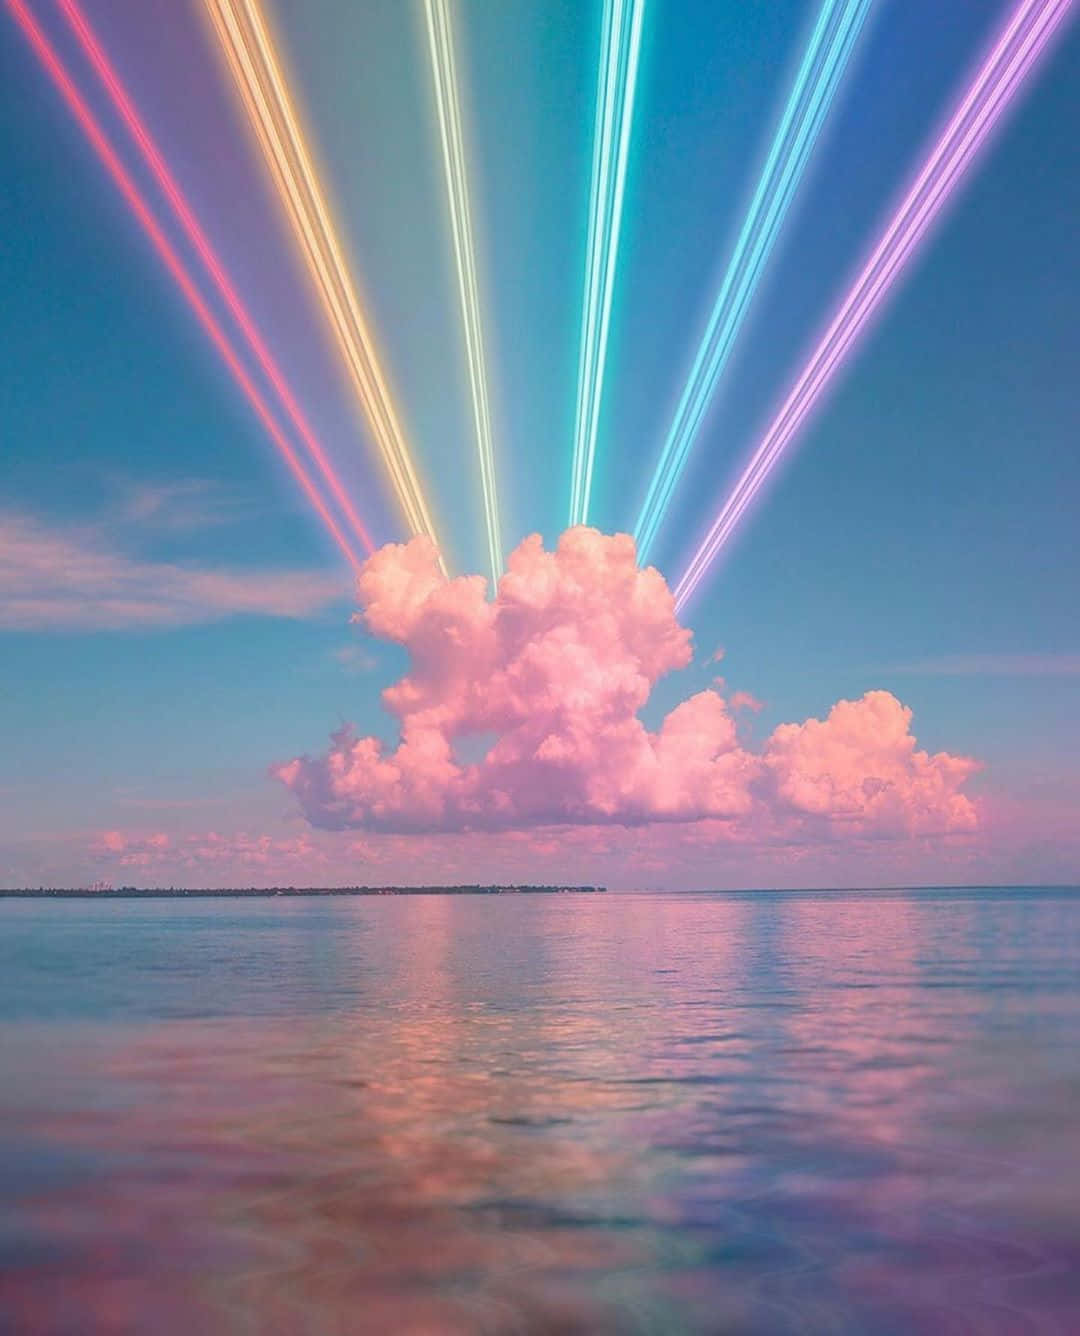 Trippy Aesthetic Clouds With Neon Rainbow Light Wallpaper